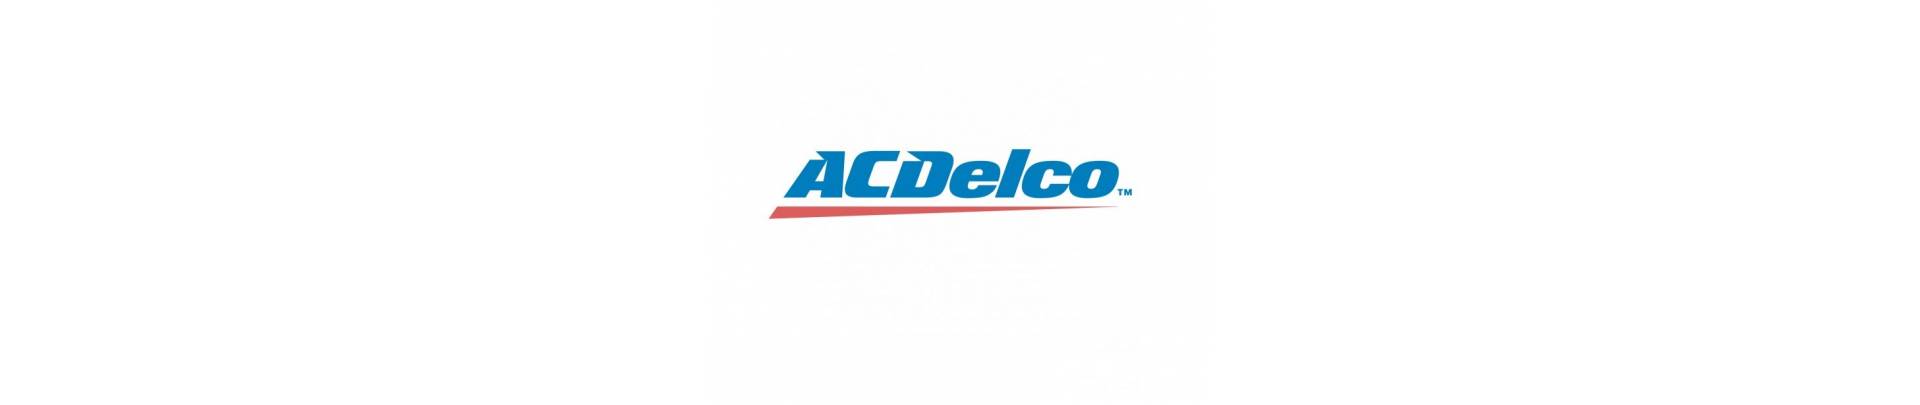 Acdelco